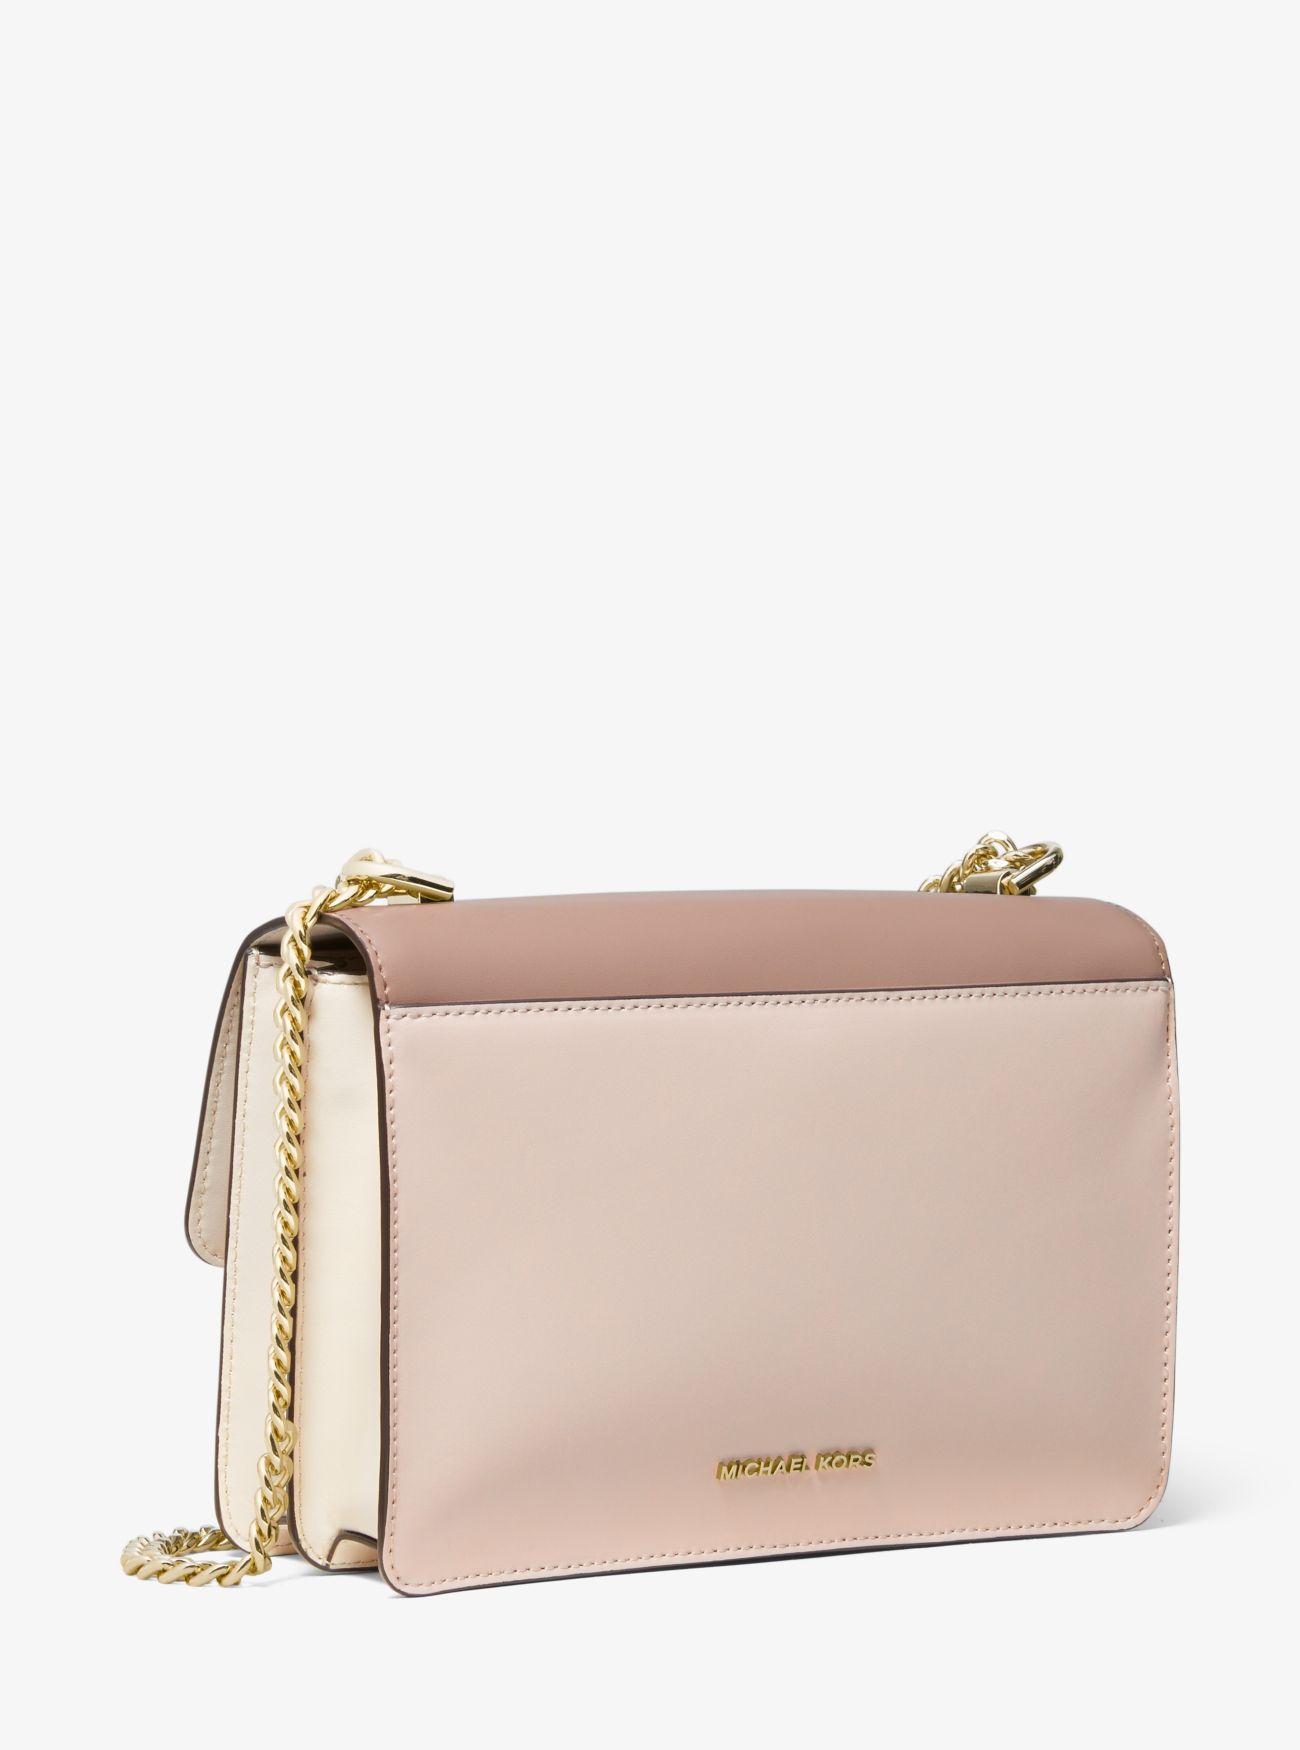 Lyst - MICHAEL Michael Kors Jade Large Tri-color Leather Crossbody in Pink